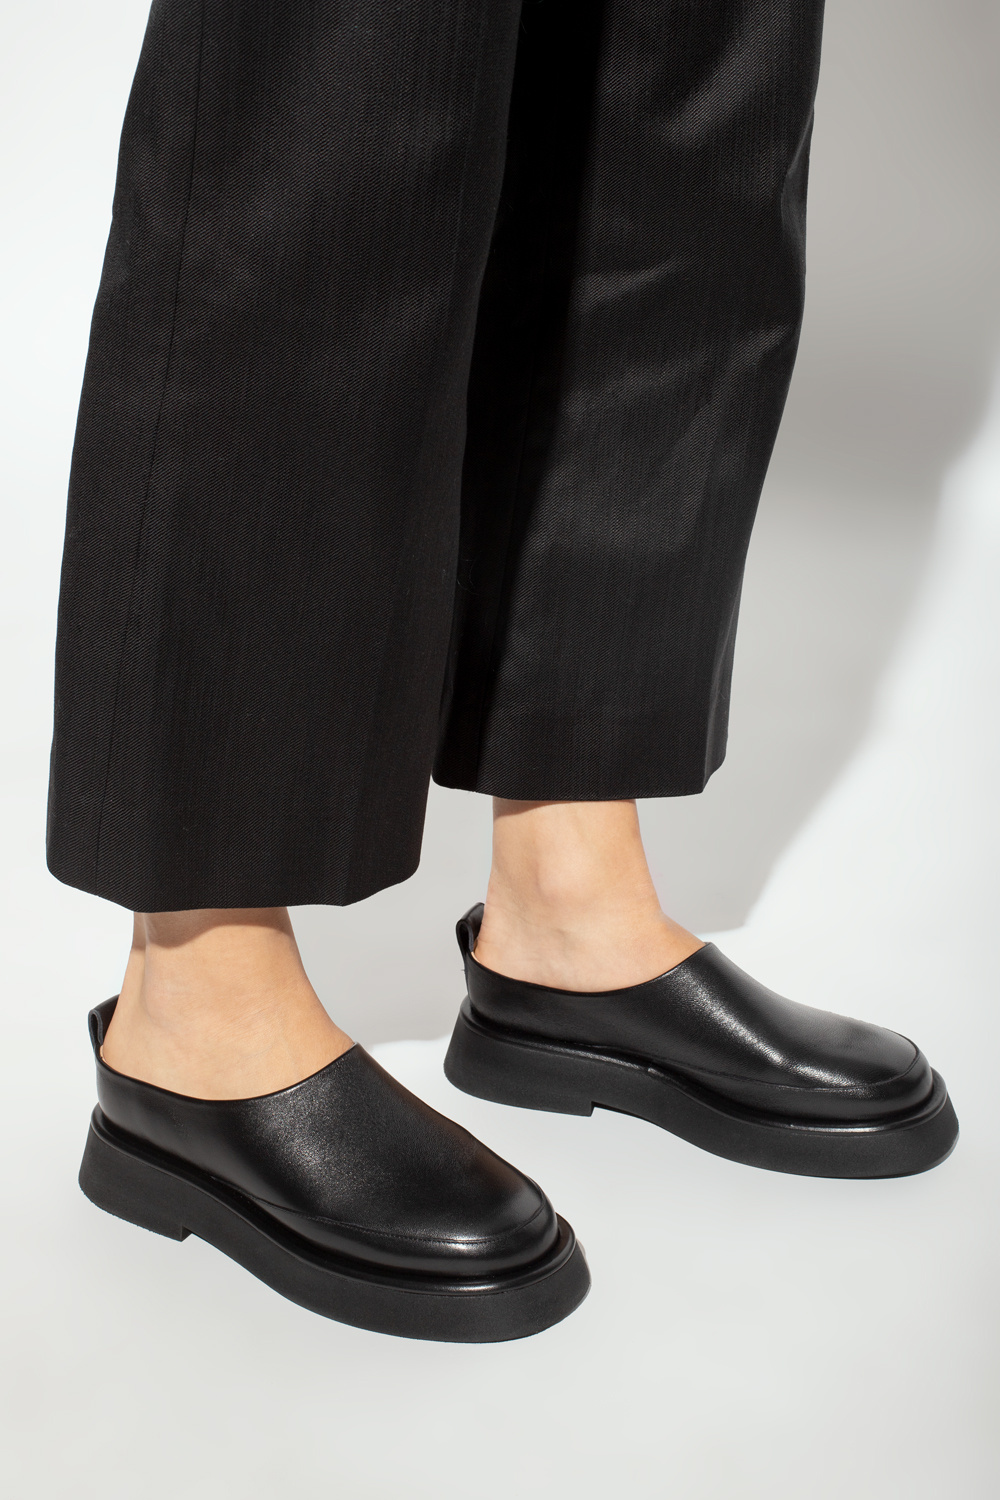 Wandler ‘Rosa’ loafers